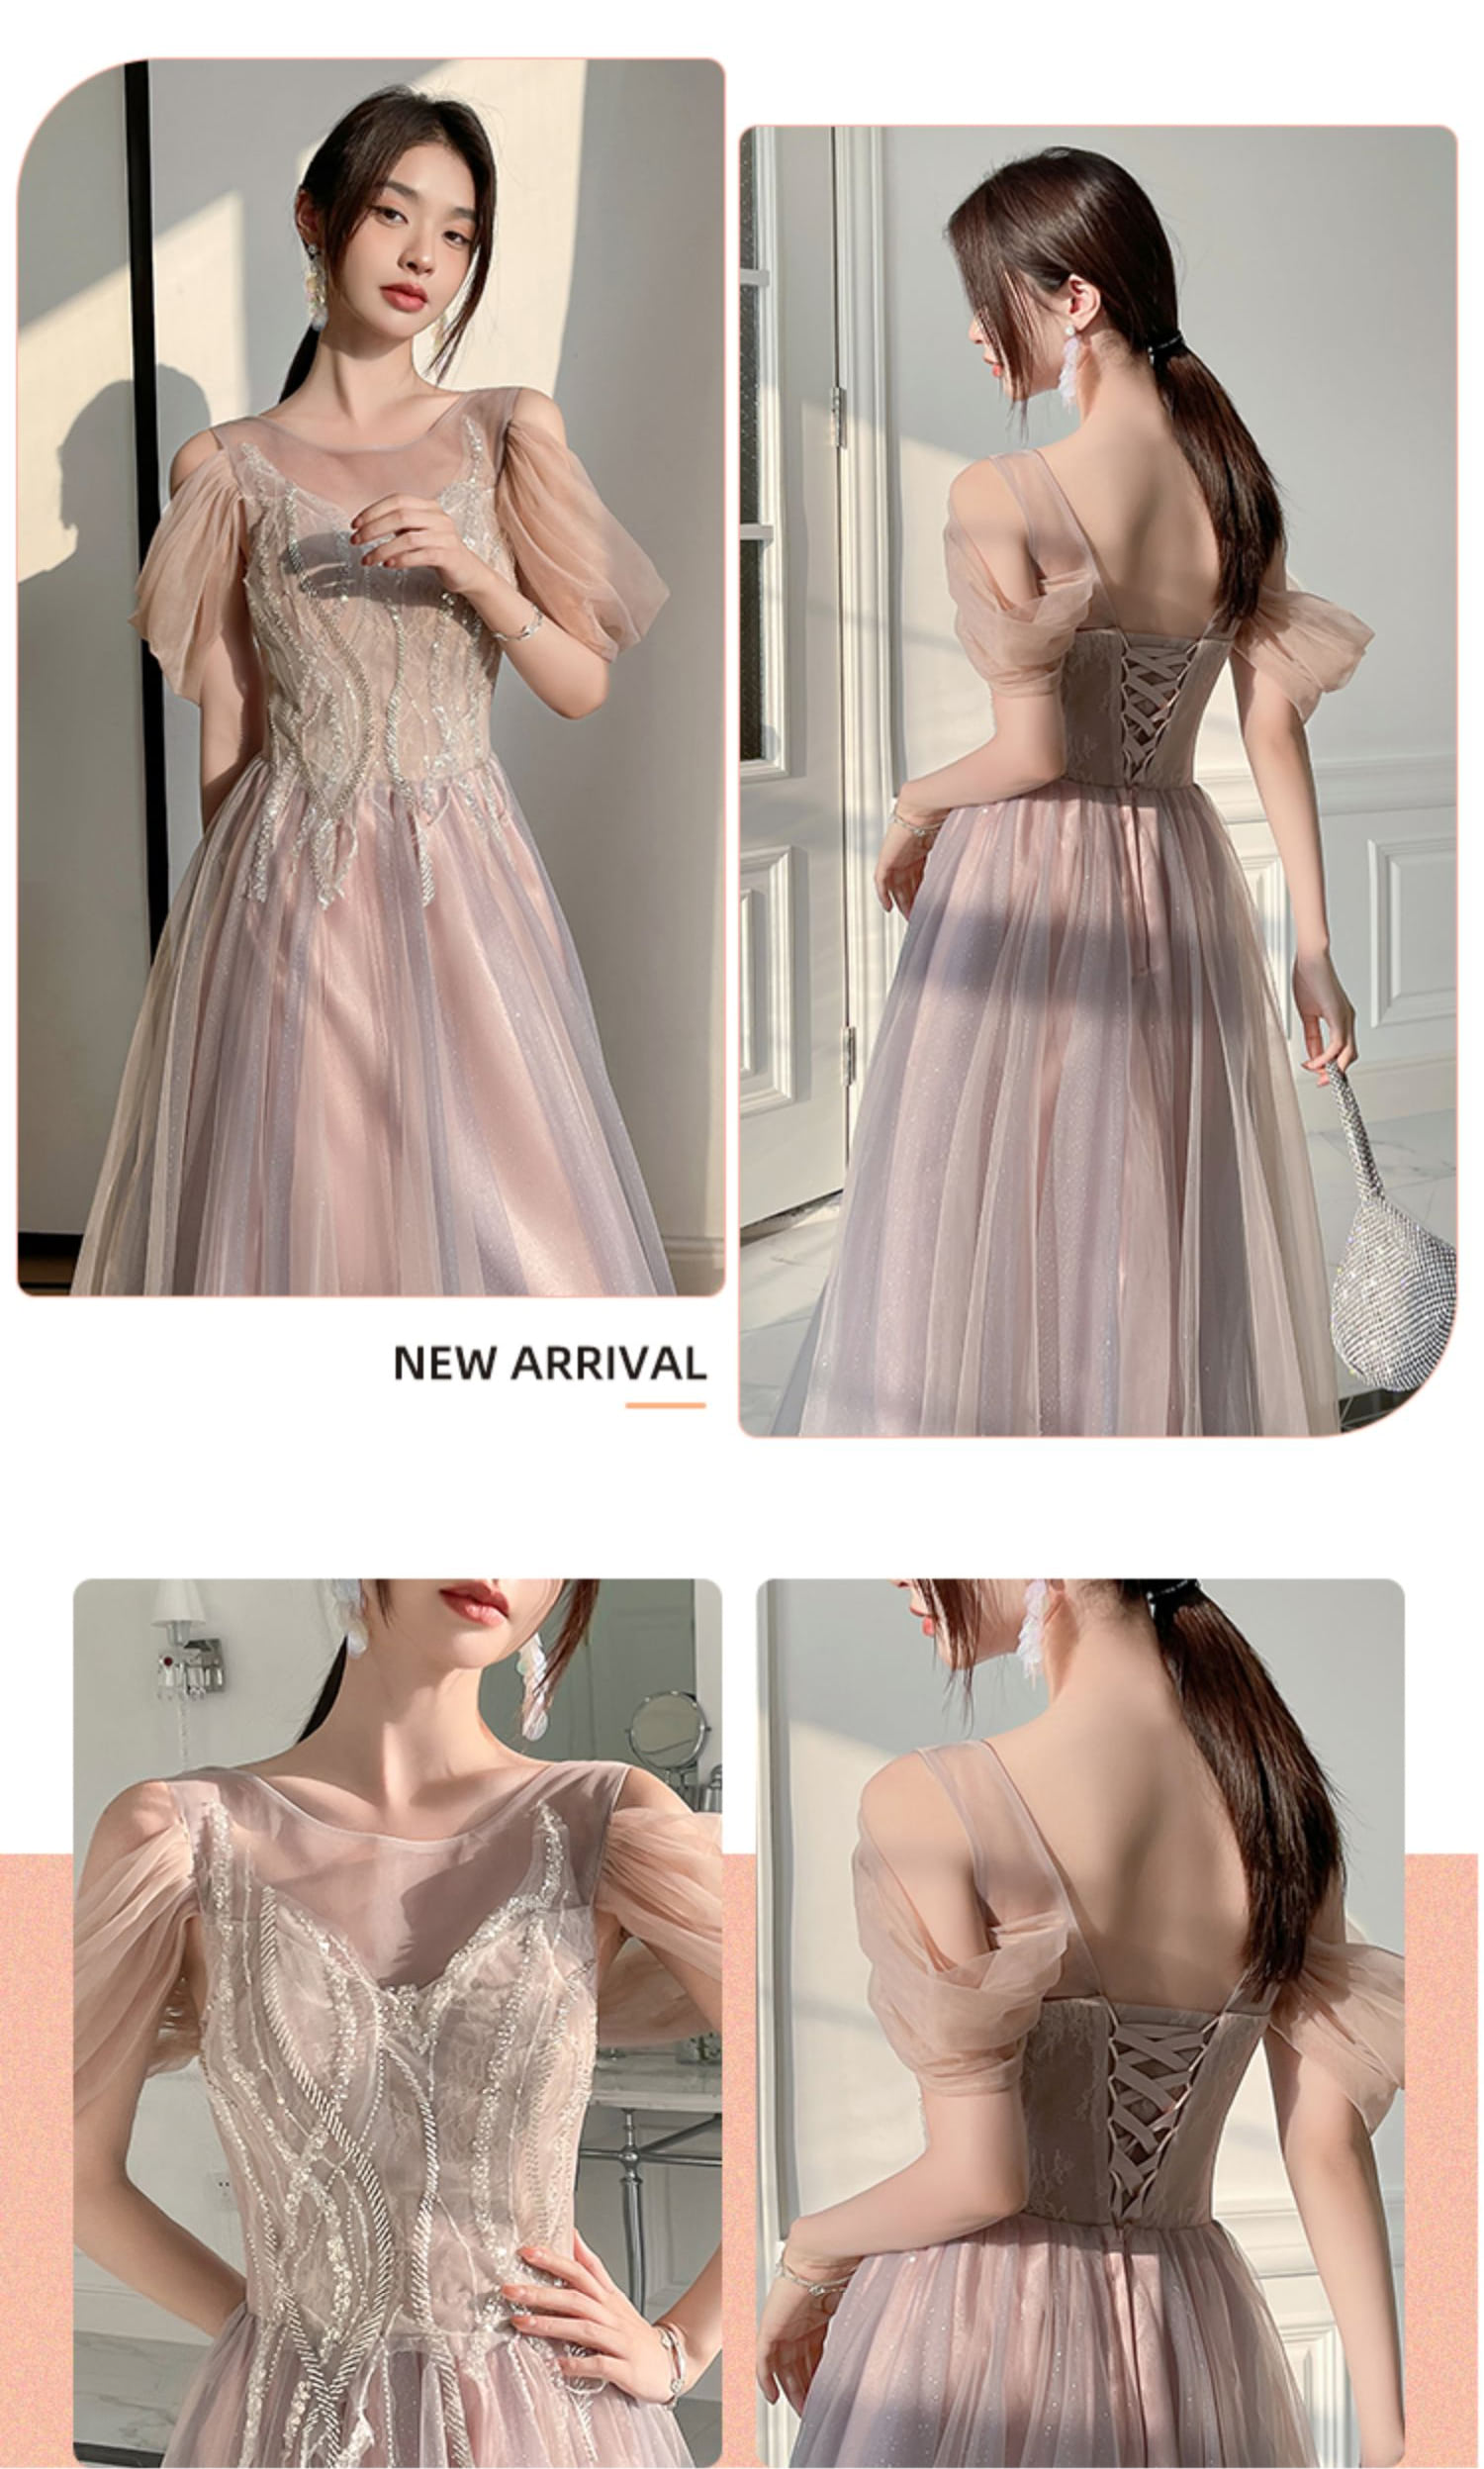 Elegant-Pale-Pink-Maxi-Bridesmaid-Dress-Long-Party-Ball-Gown25